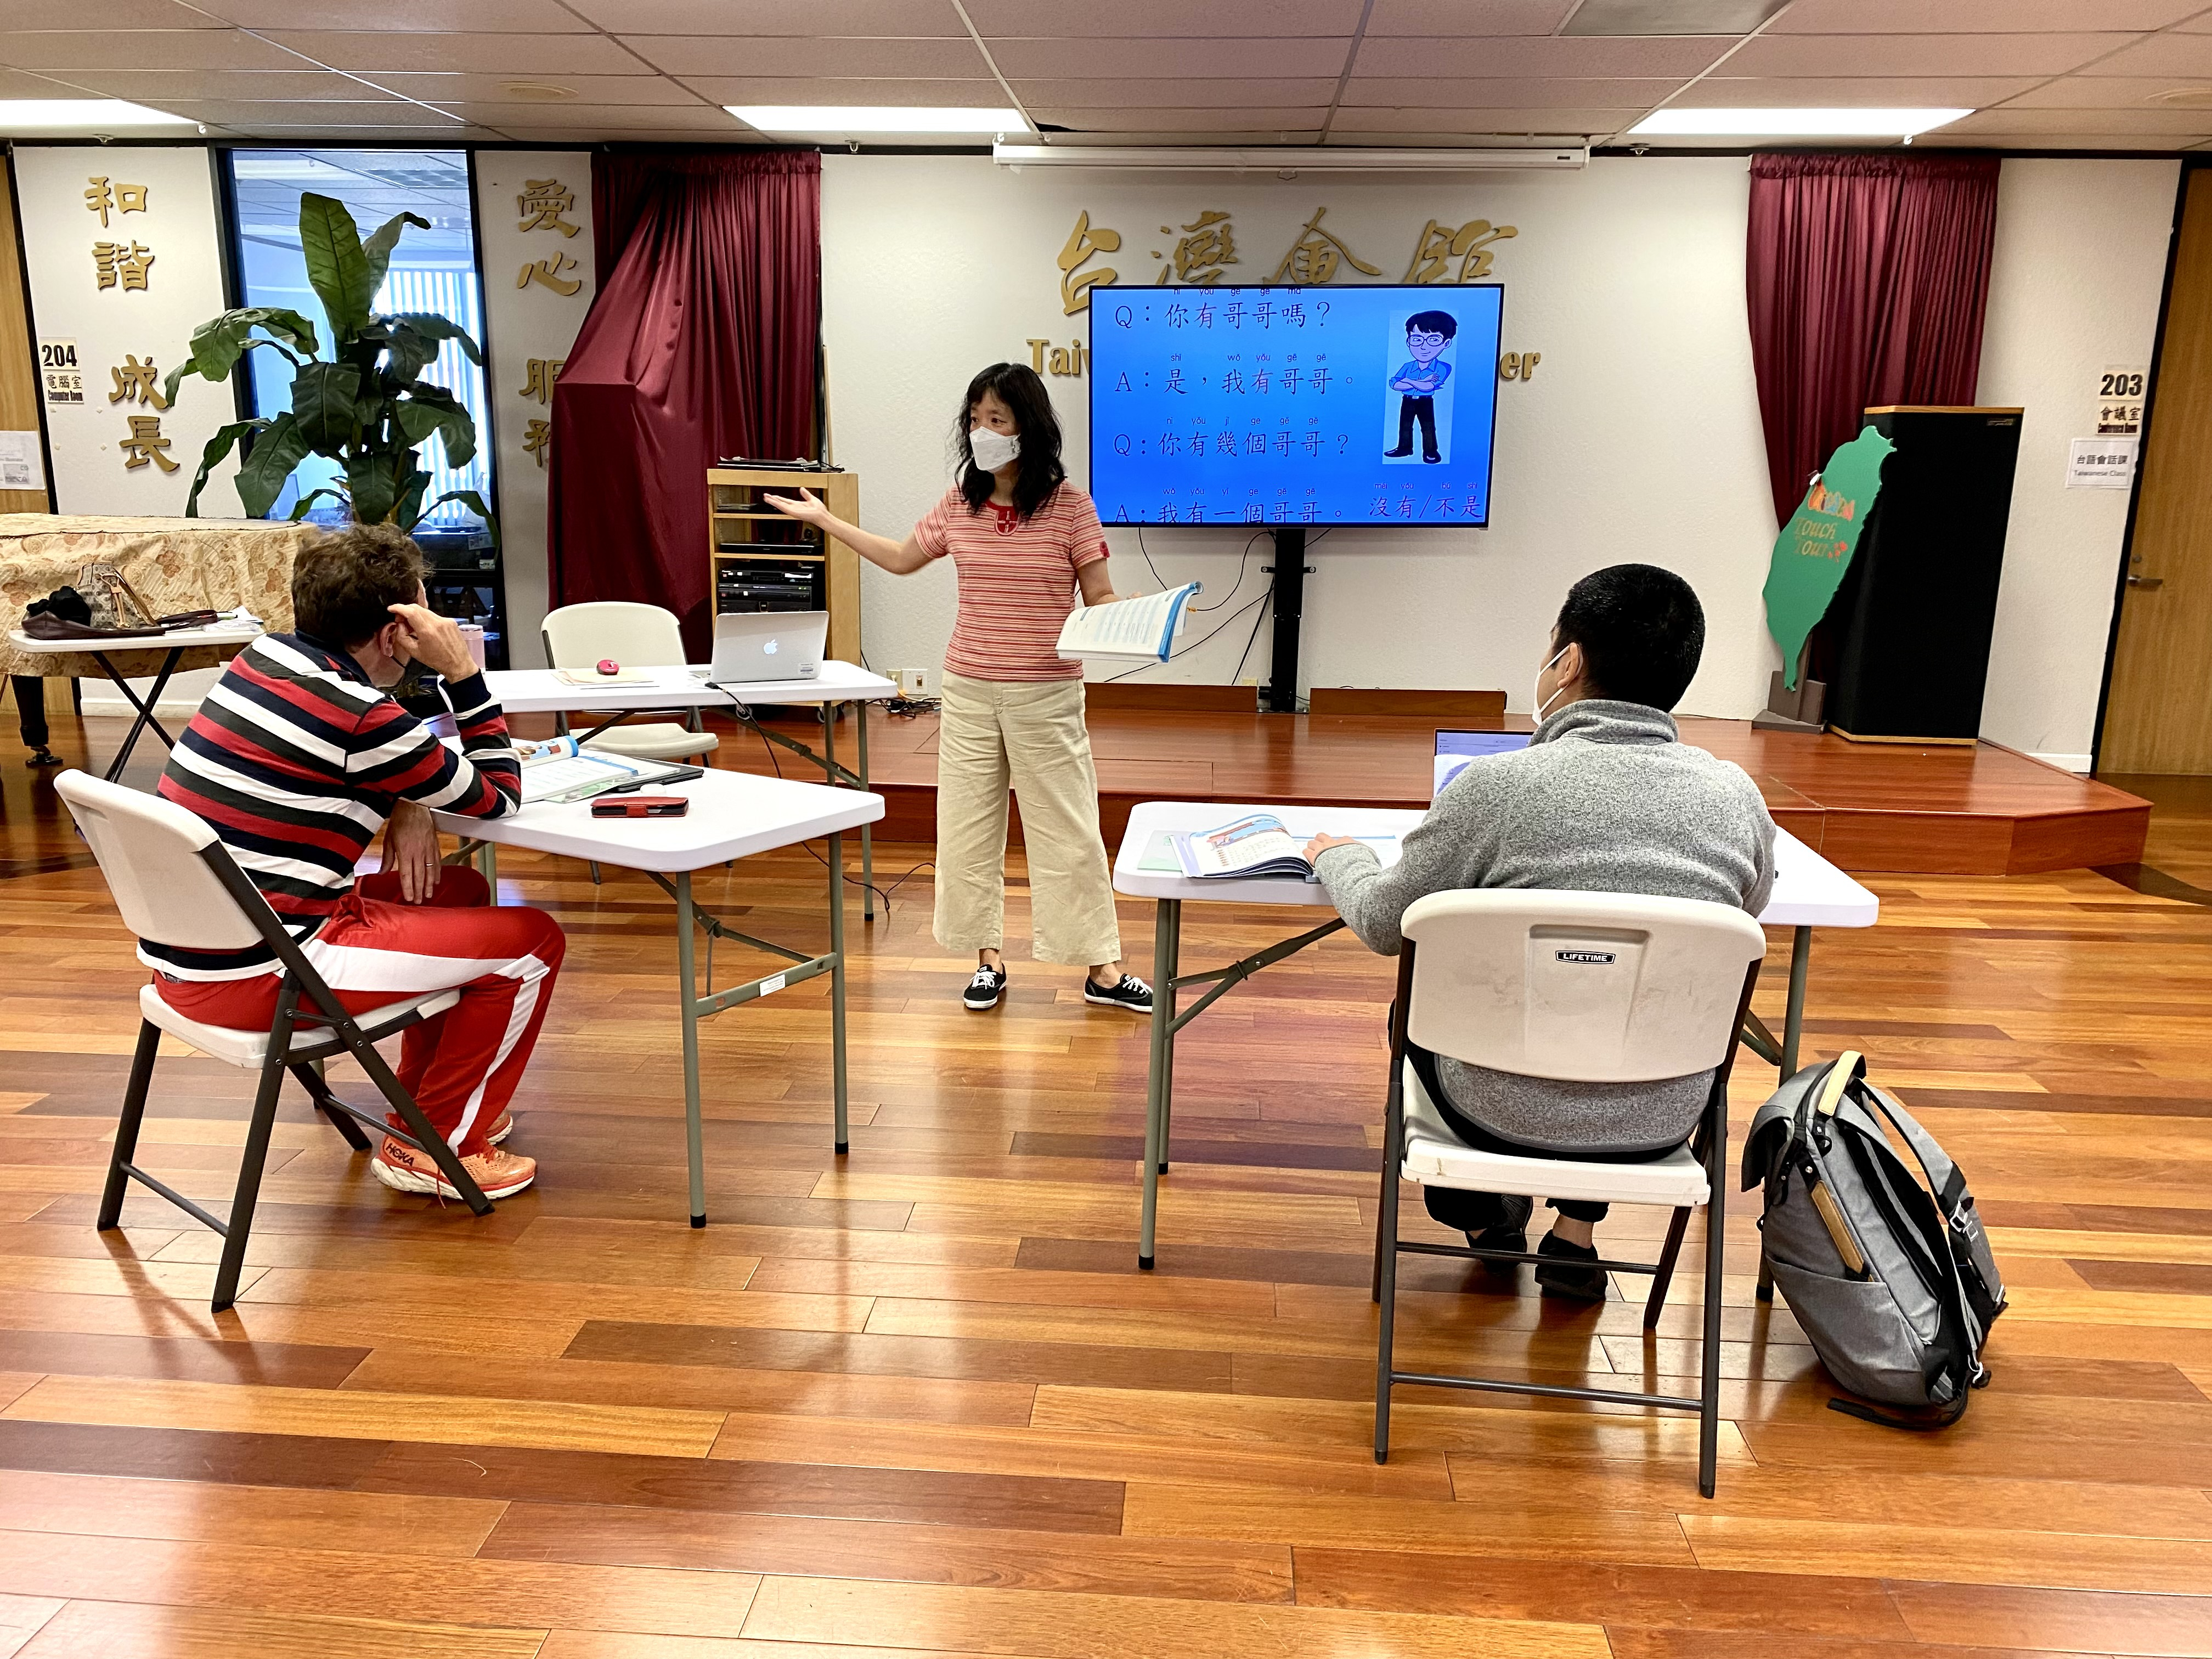 Class in progress at the Taiwan Center for Mandarin Learning - Taiwanese American Center of Northern California. 上課情形